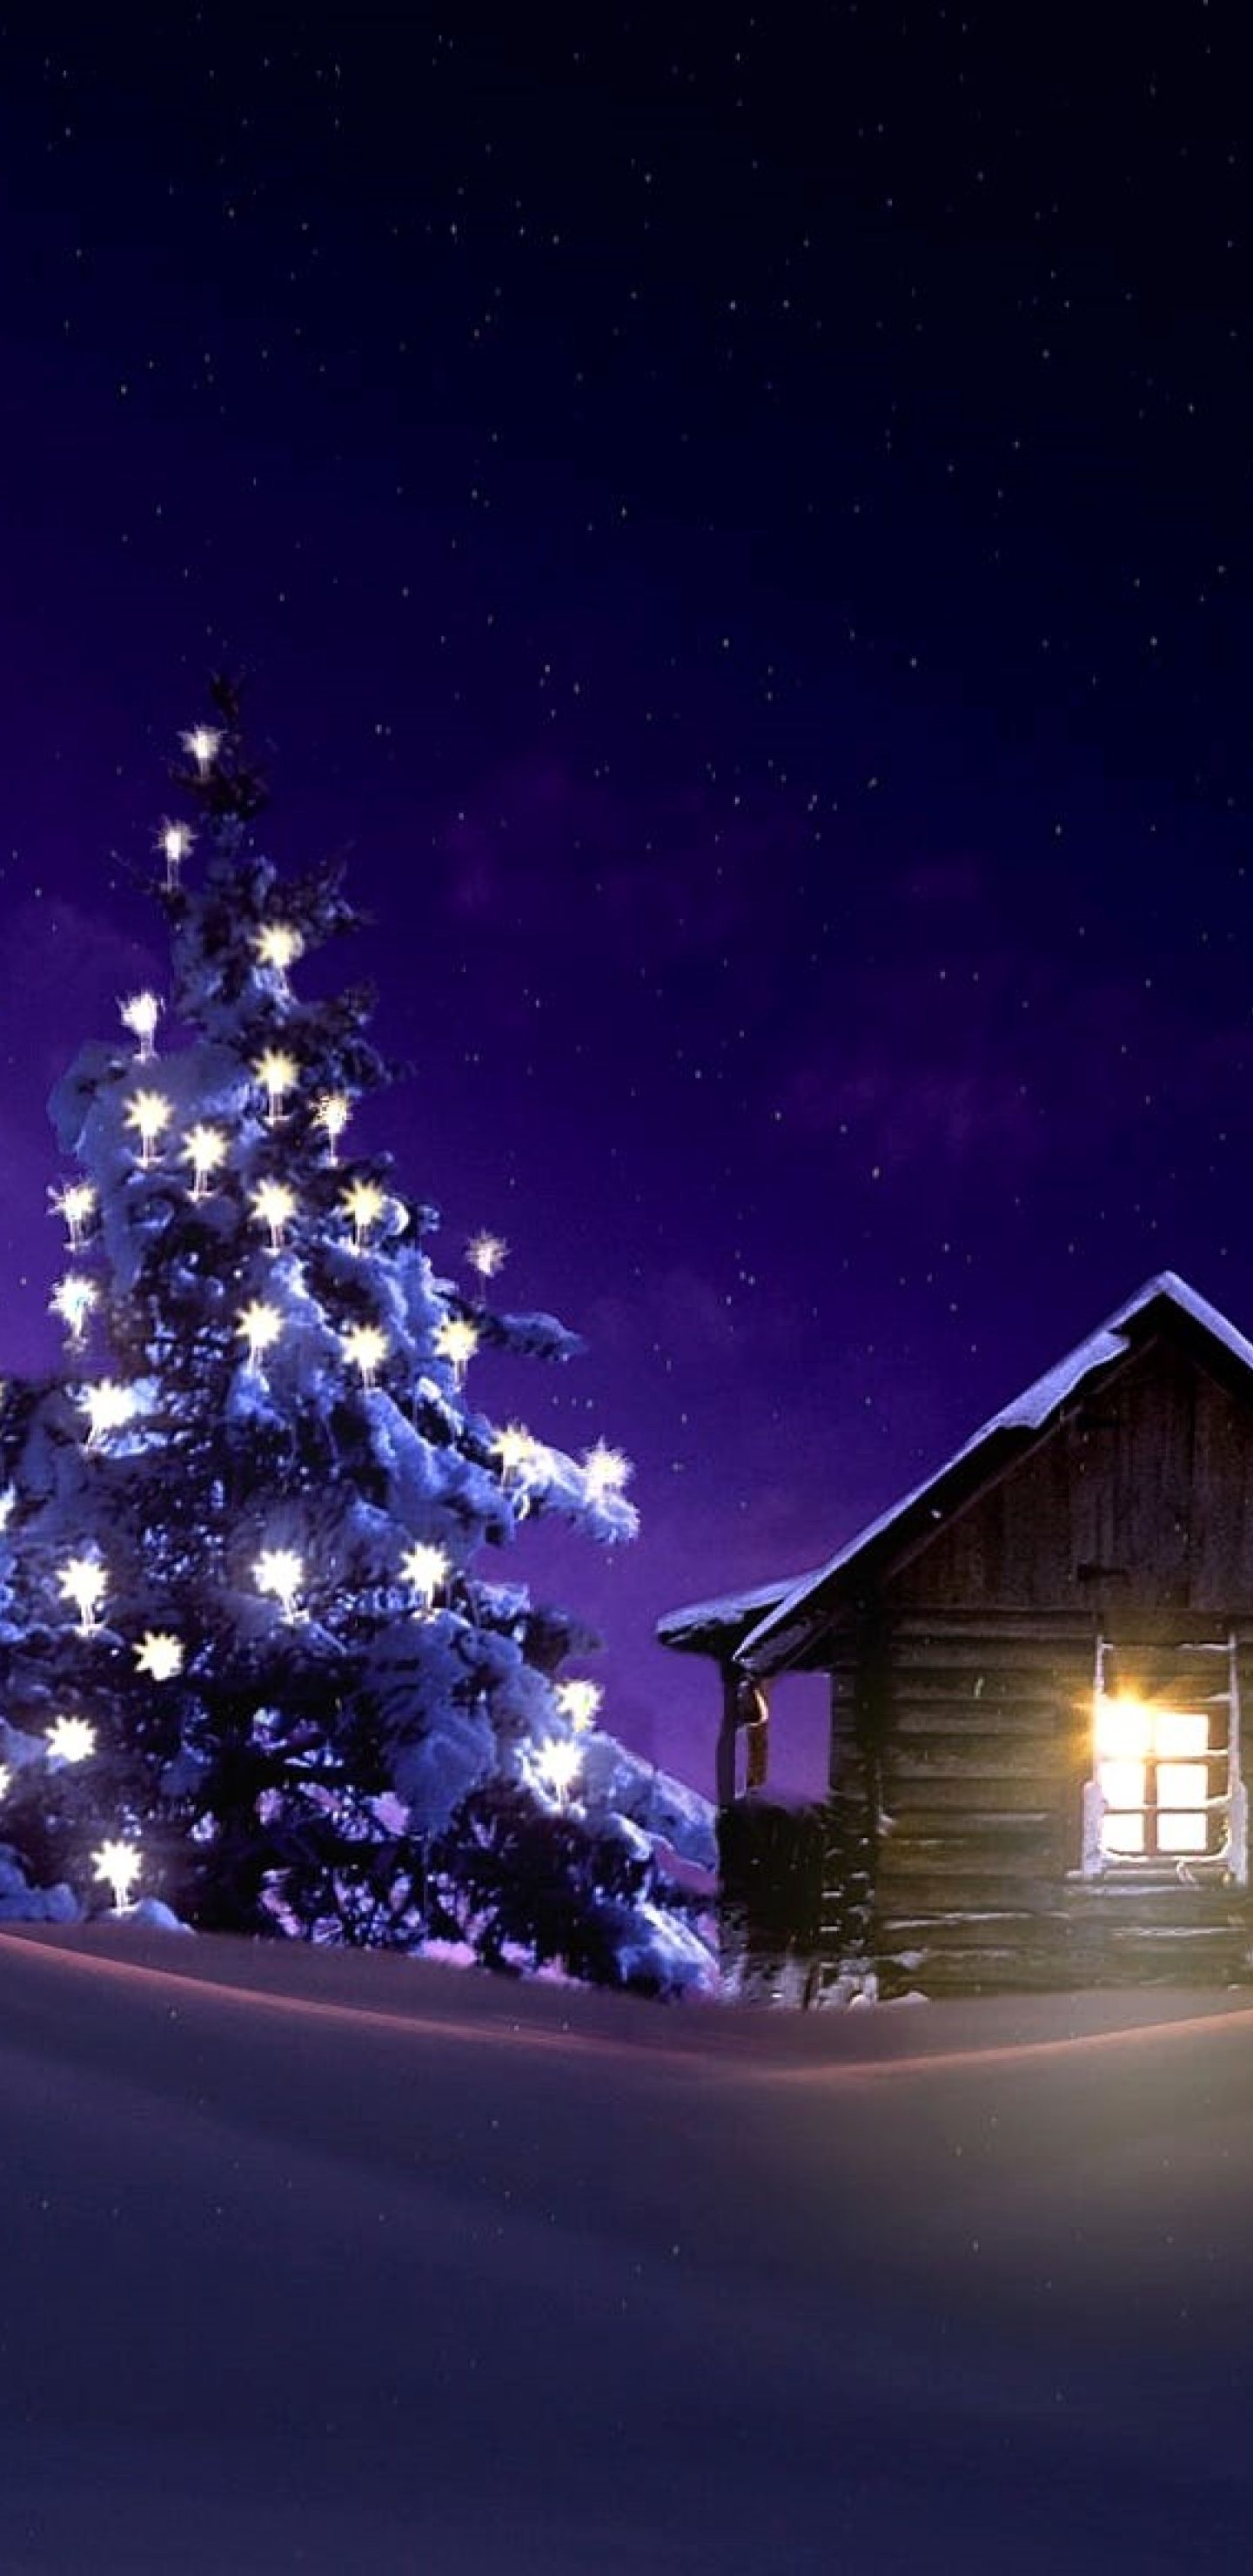 Christmas Lighted Tree Outside Winter Cabin Samsung Galaxy Note S S SQHD Wallpaper, HD Holidays 4K Wallpaper, Image, Photo and Background